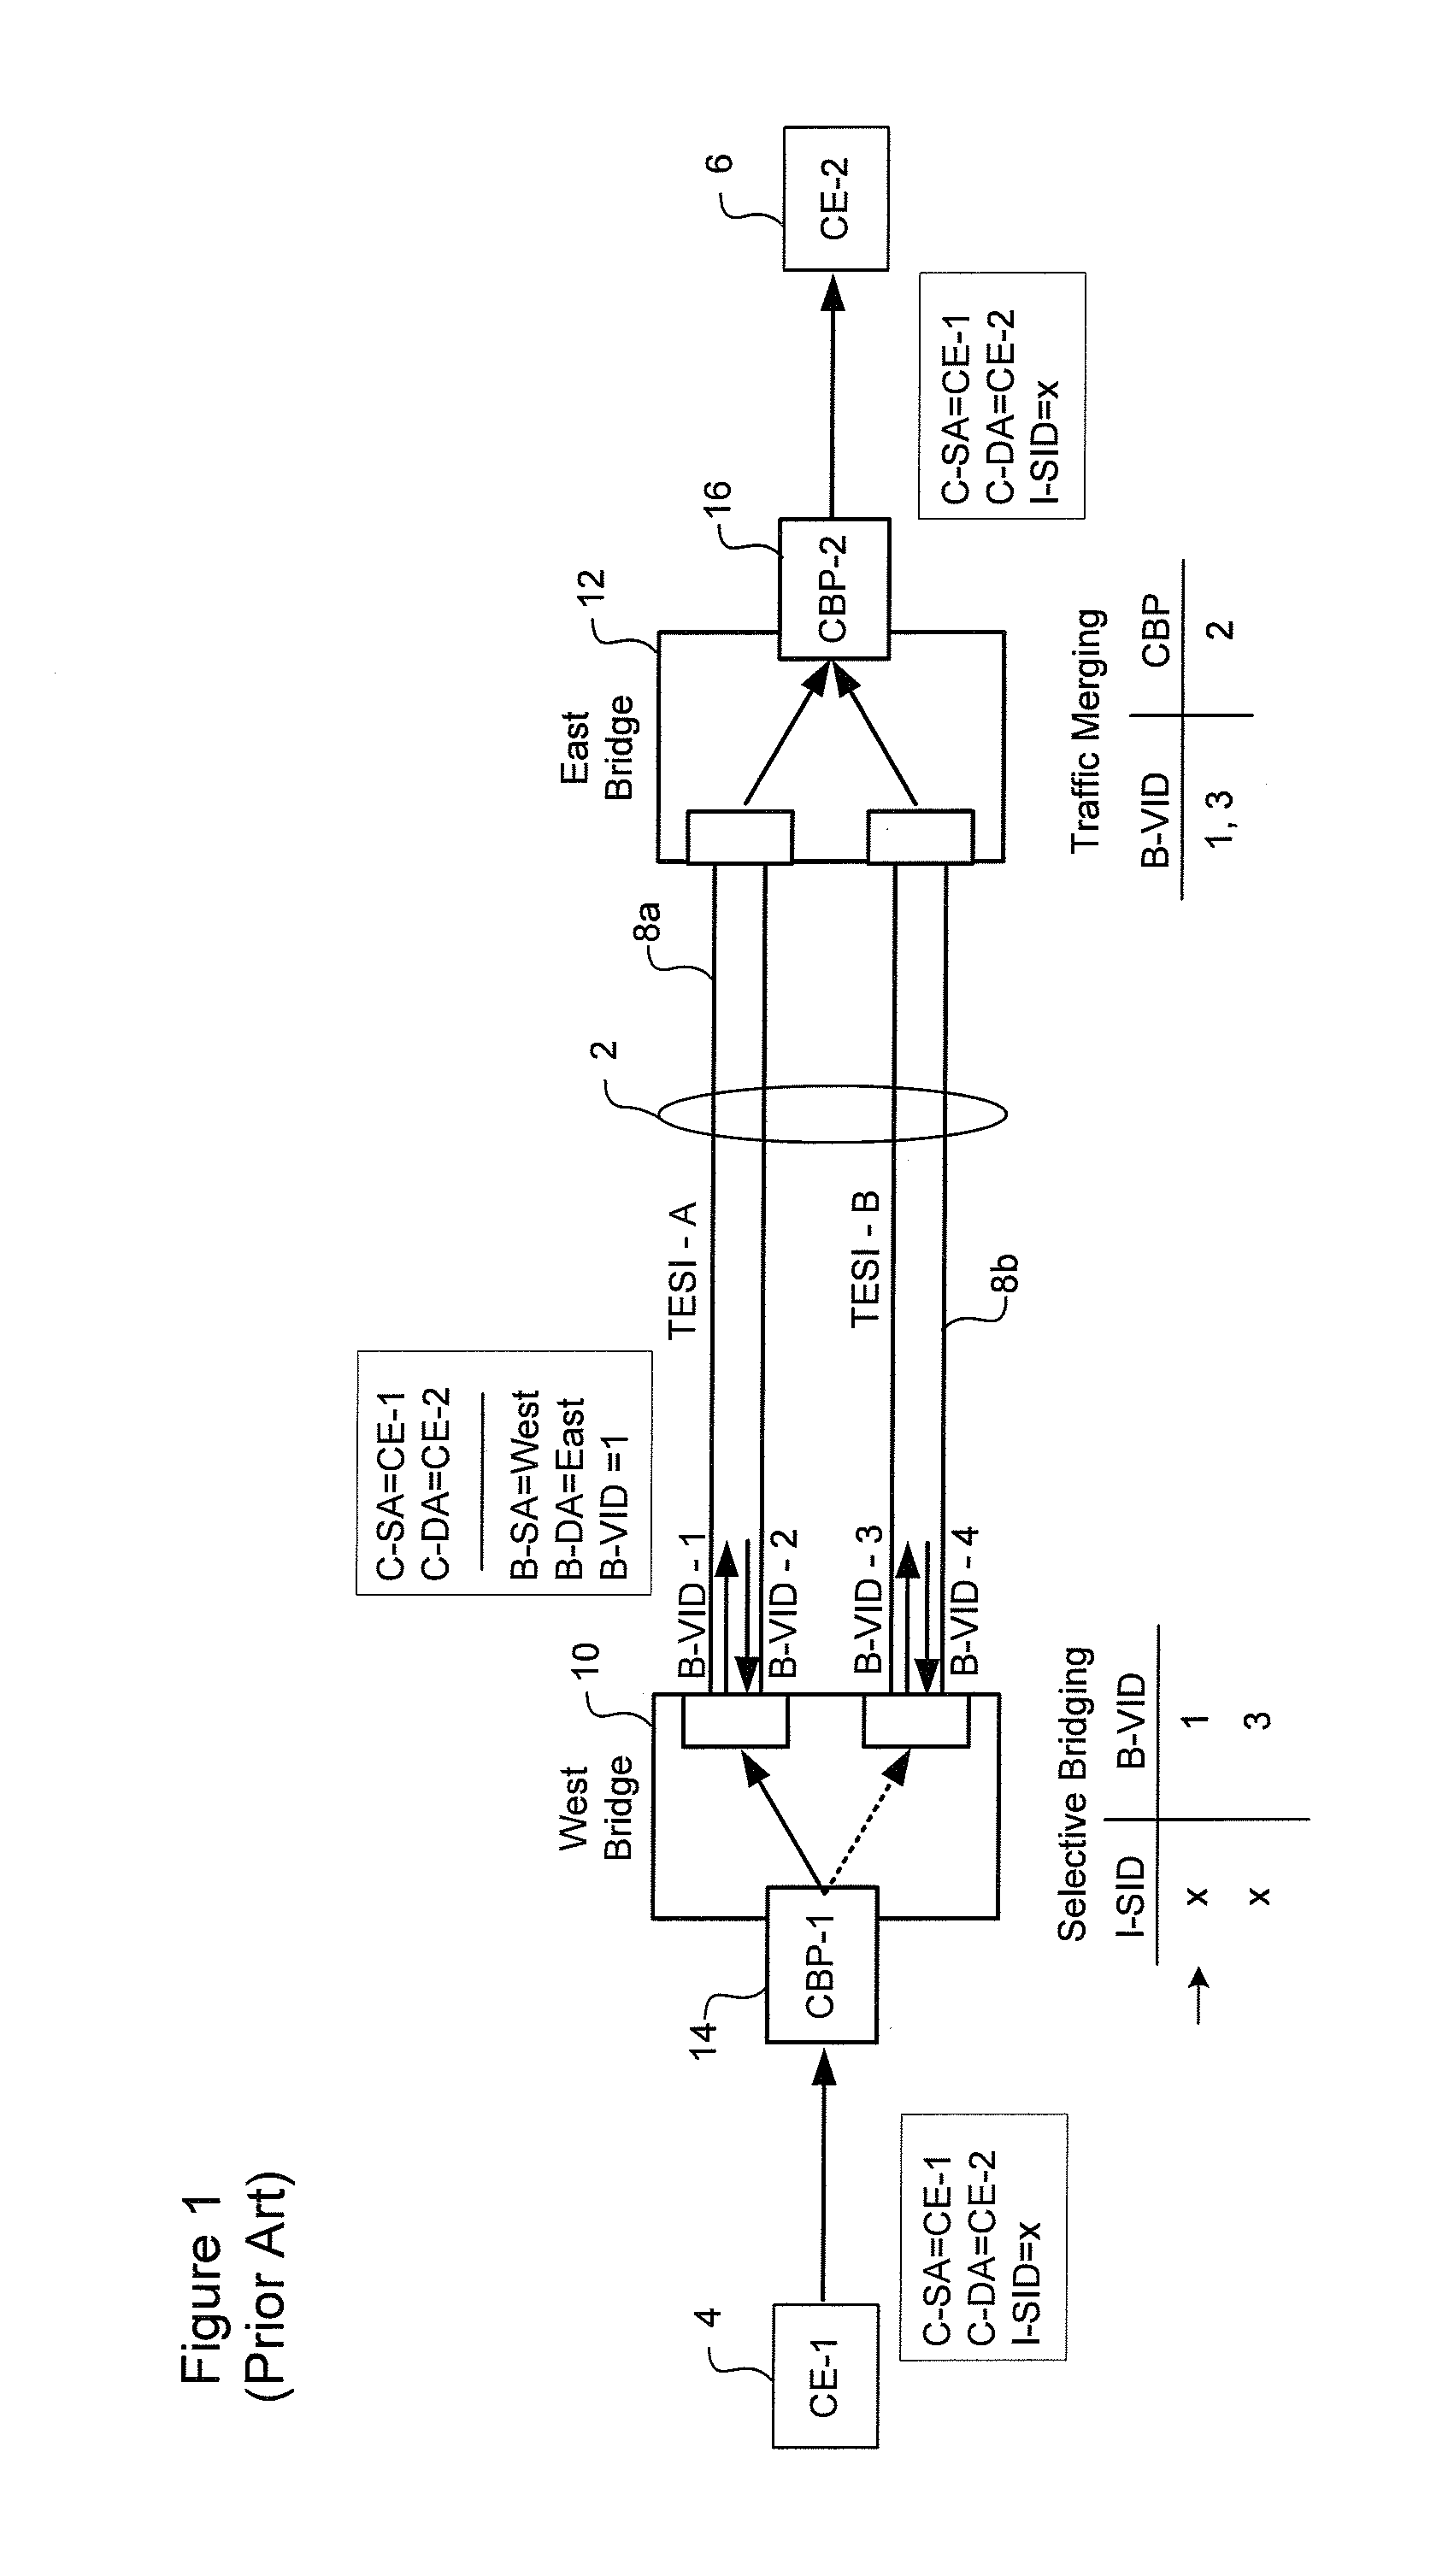 In-band signalling for point-point packet protection switching